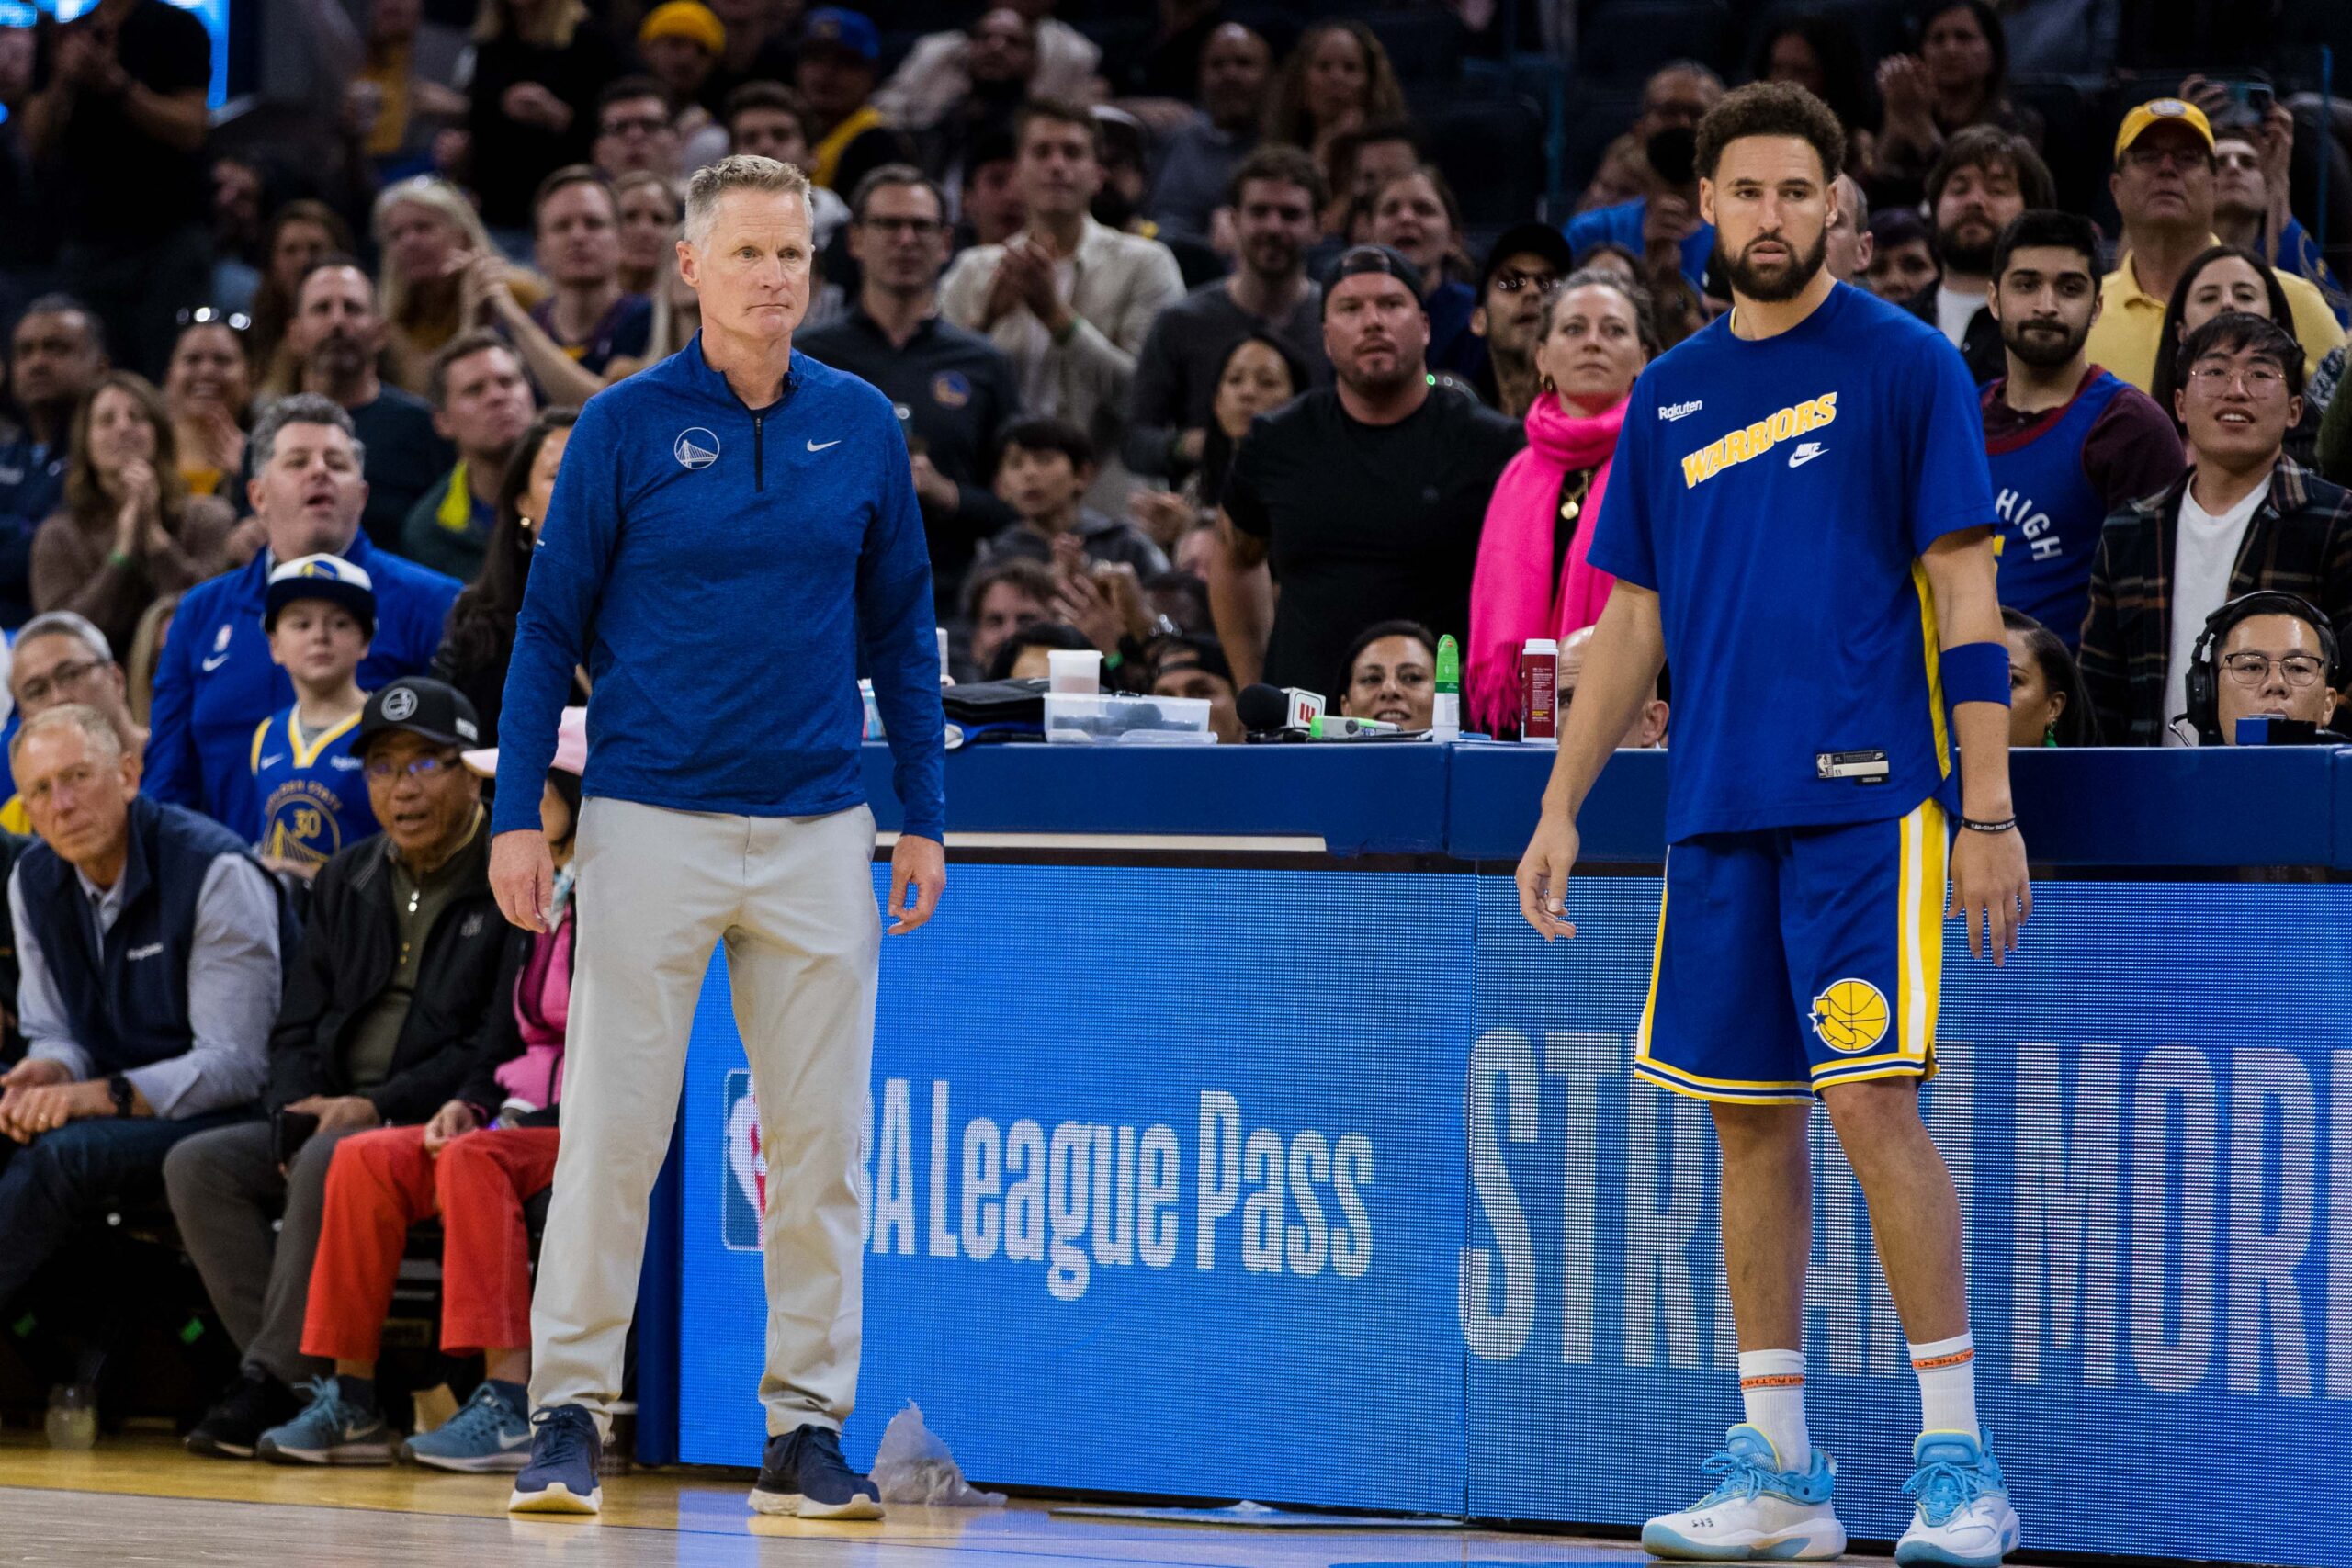 Oct 21, 2022; San Francisco, California, USA; Golden State Warriors head coach Steve Kerr and guard Klay Thompson (11) watch during the second half of the game against the Denver Nuggets at Chase Center. Mandatory Credit: John Hefti-USA TODAY Sports